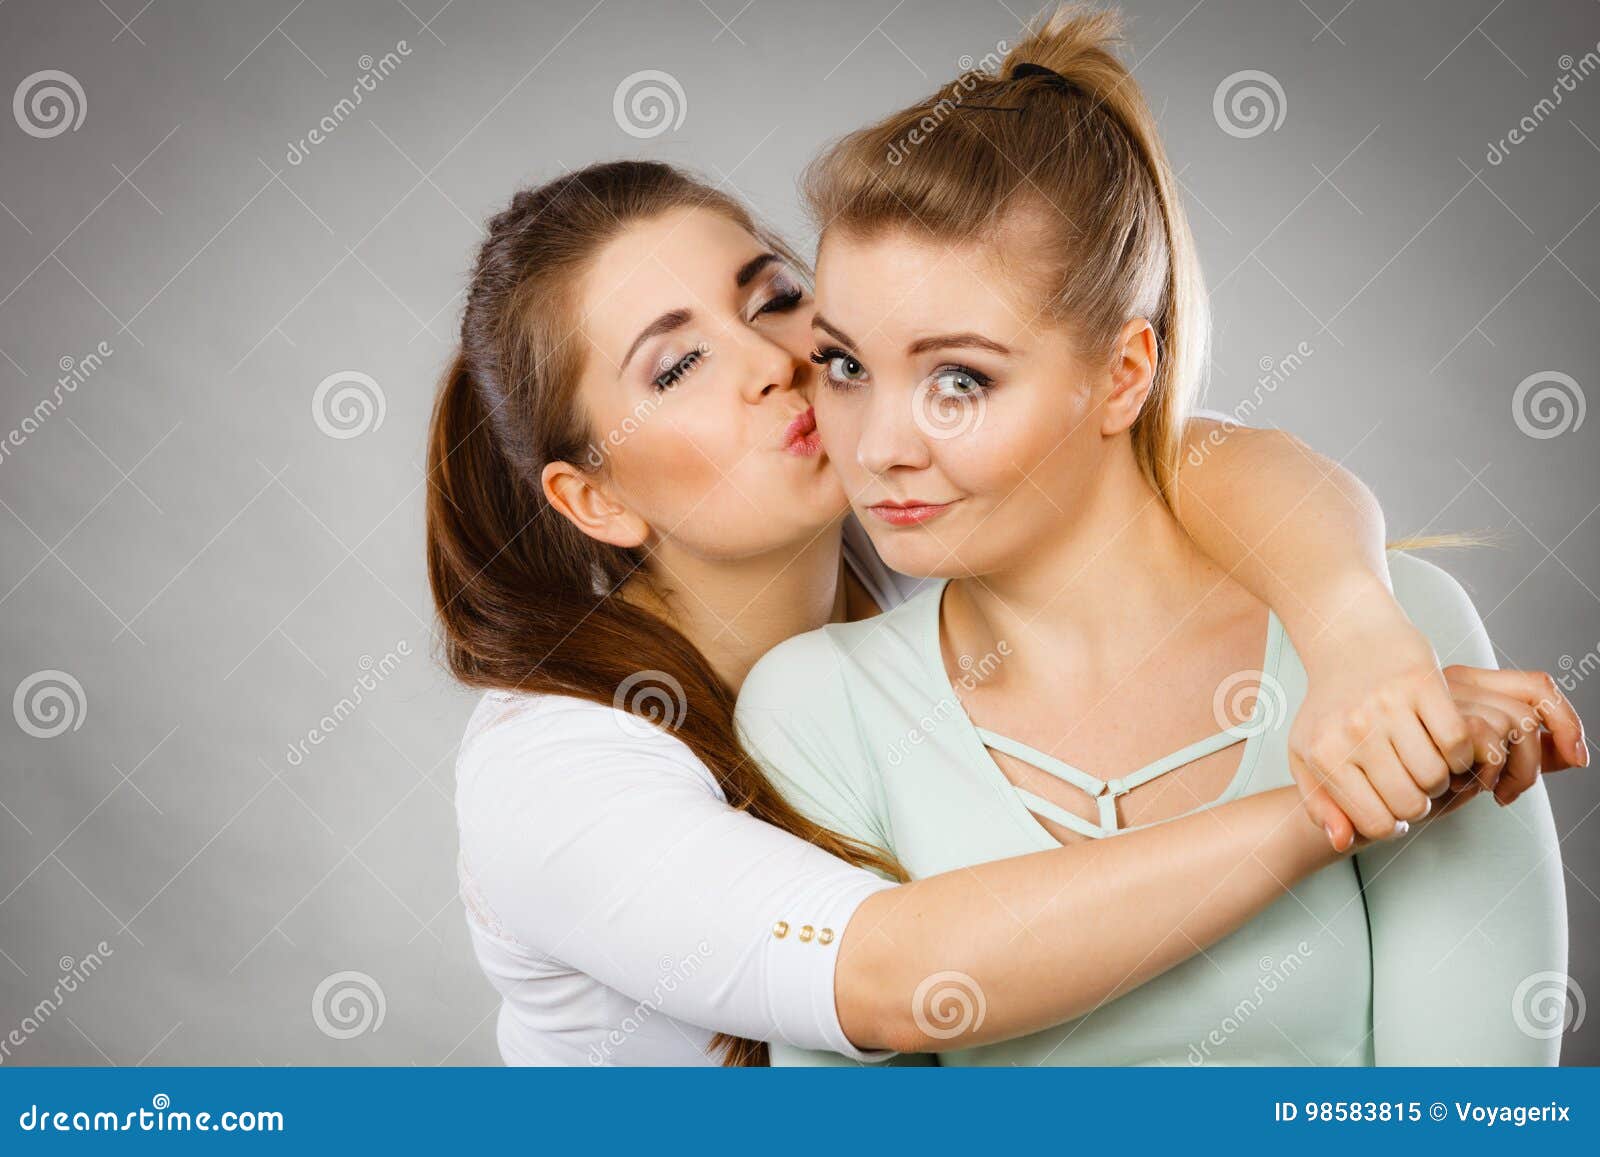 Woman Hugging Her Sad Female Friend Stock Image Image Of Mourning